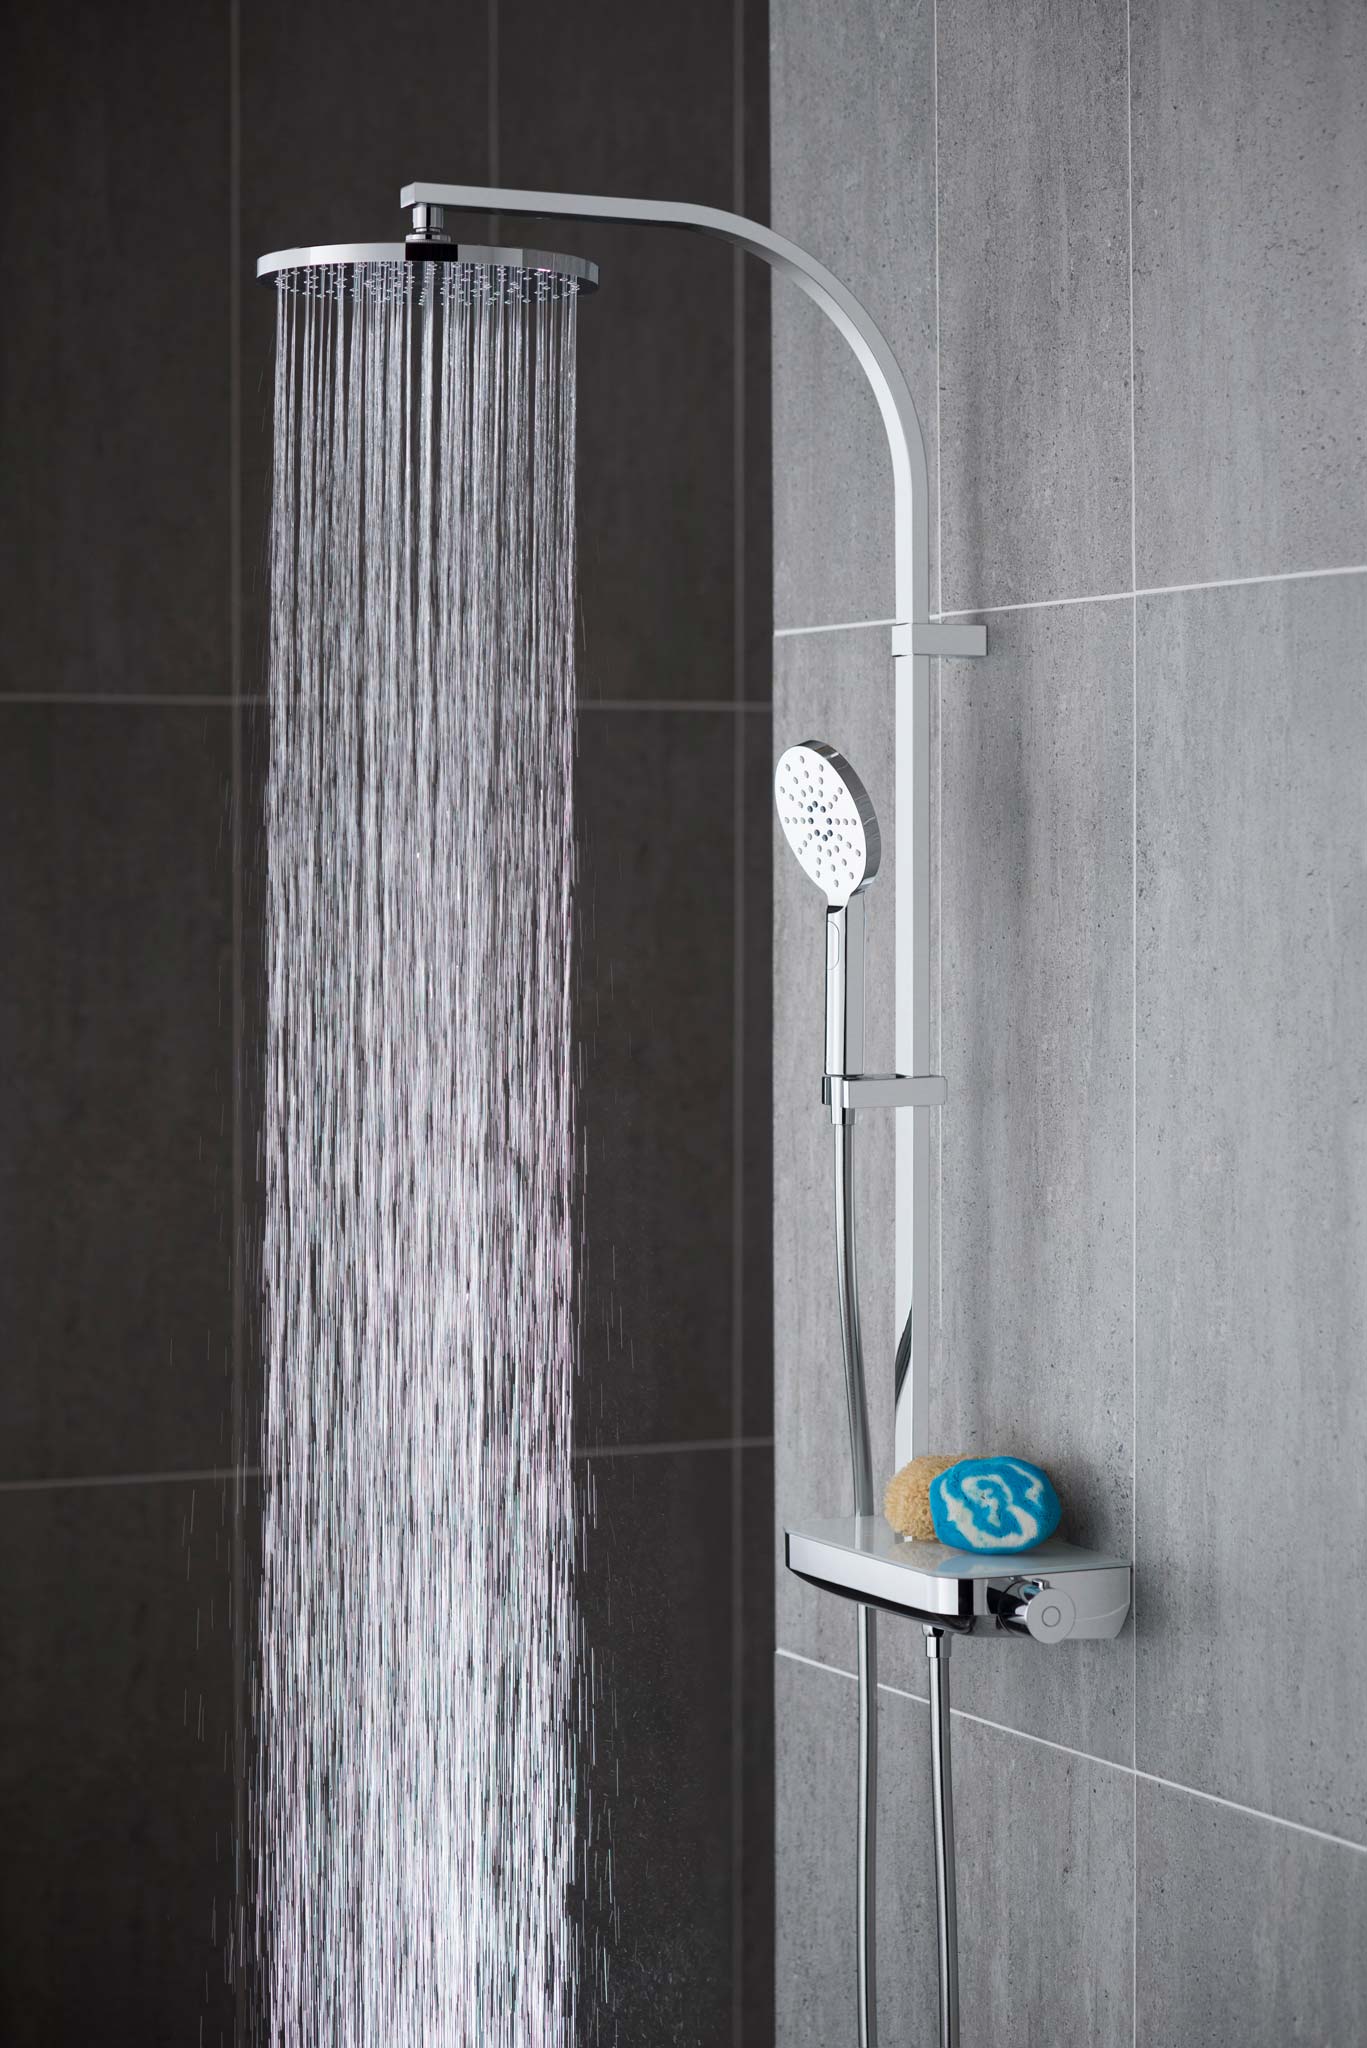 Modern round rigid riser in a grey tiled room with water cascading out of the shower head.